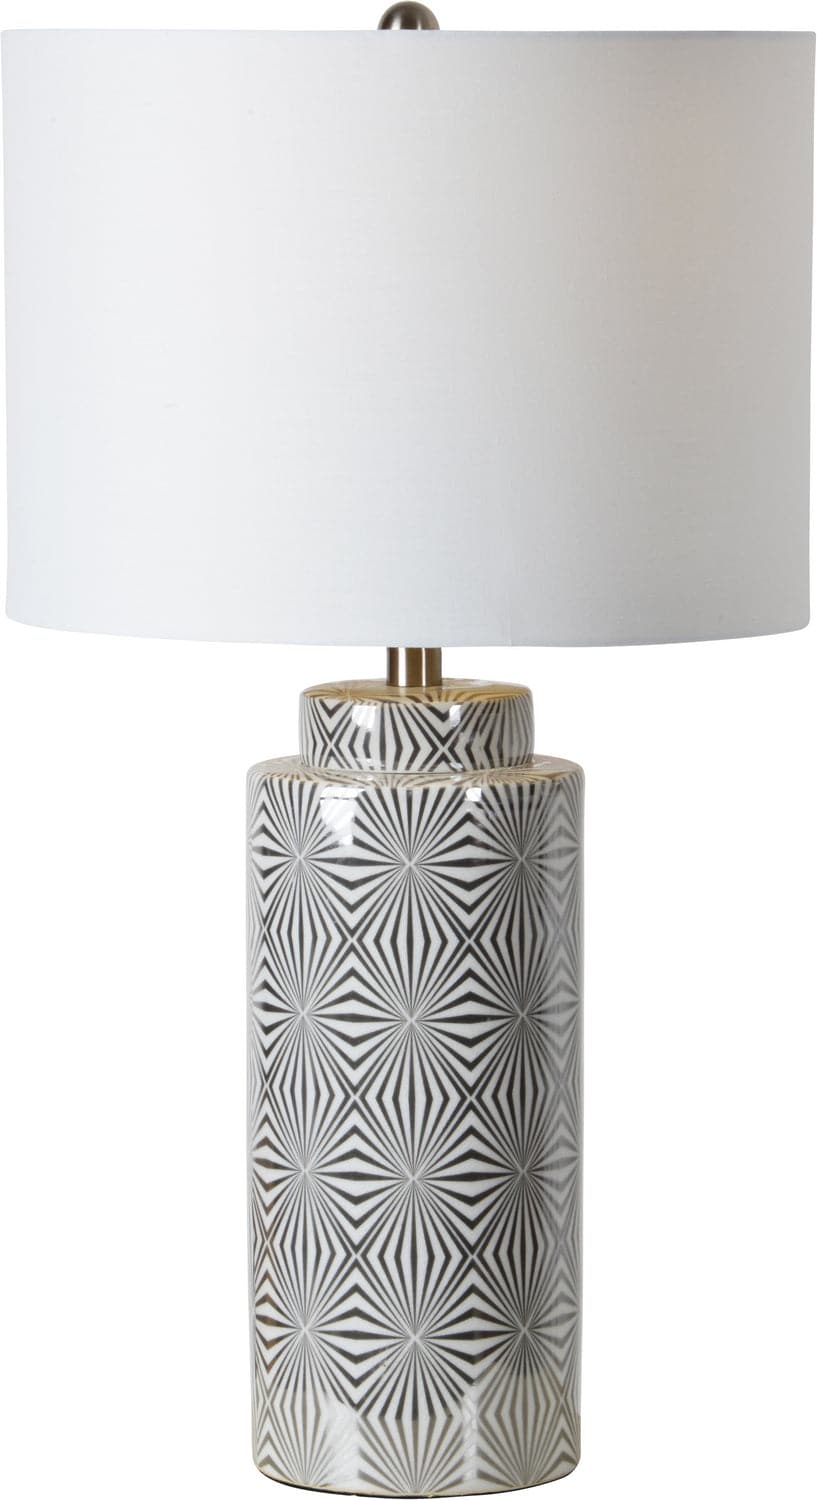 Renwil - LPT716 - One Light Table Lamp - Camden - Silver/White